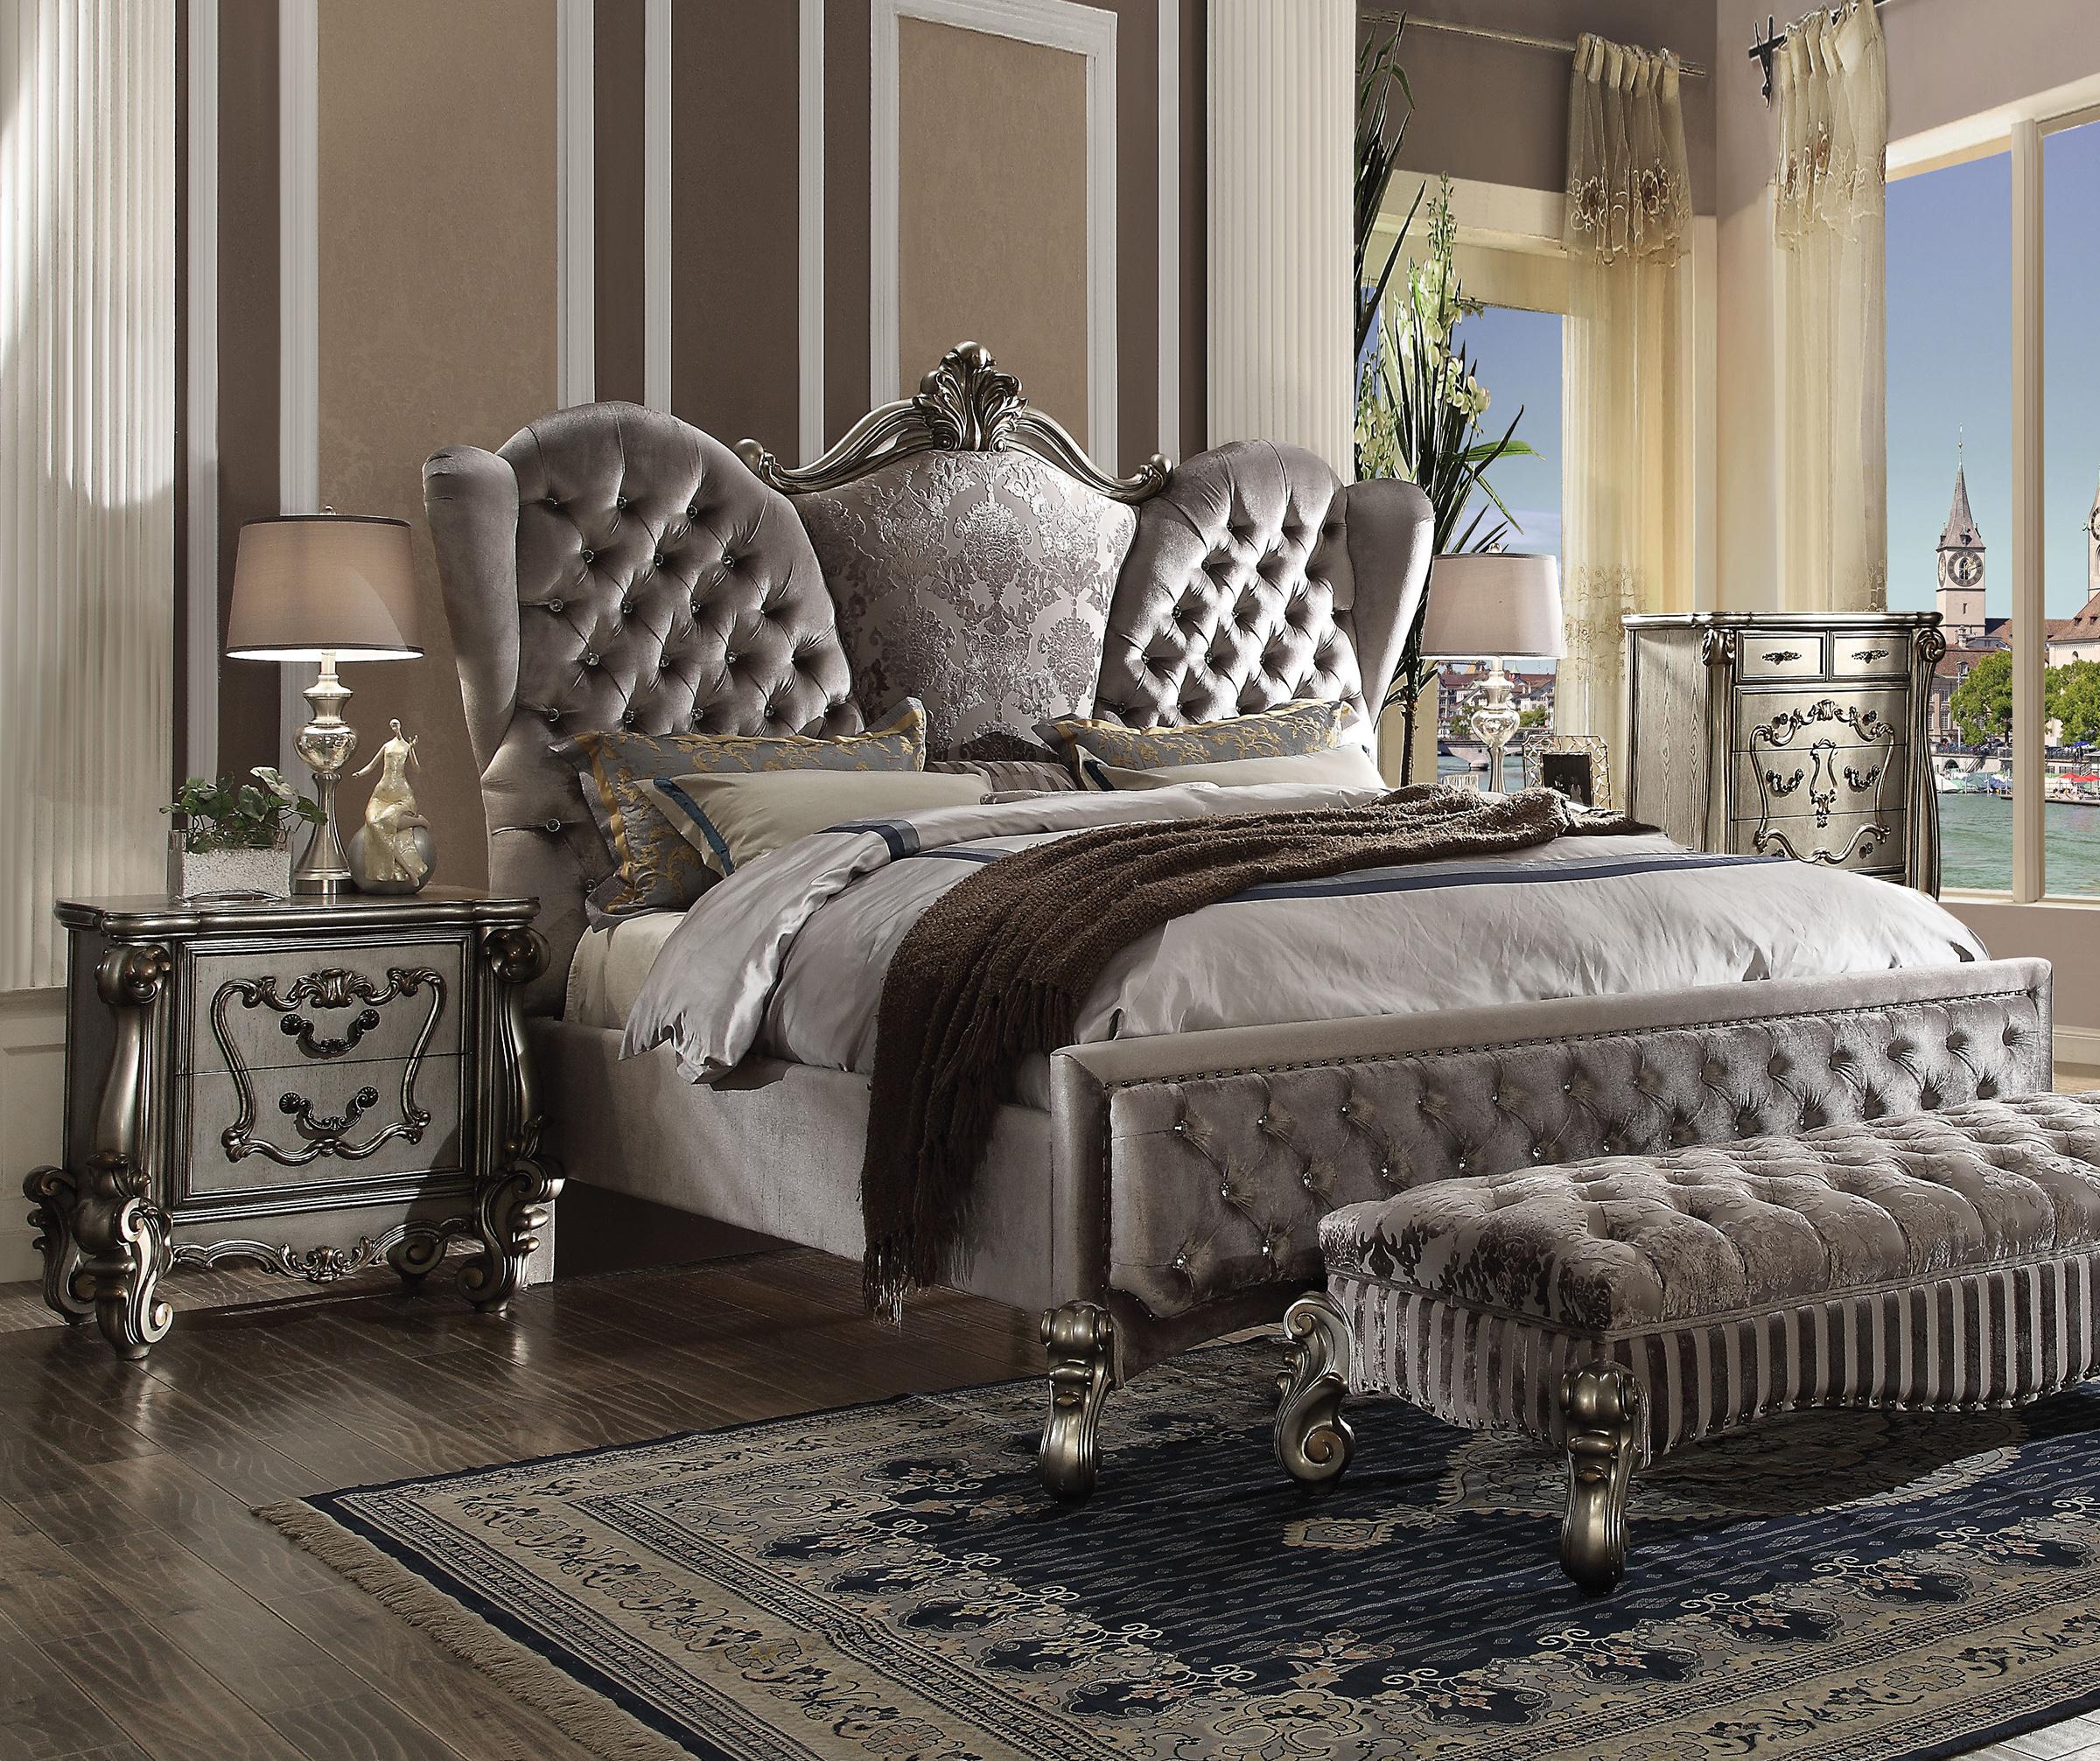 

    
Doline Tufted Upholstered Bed King Classic
